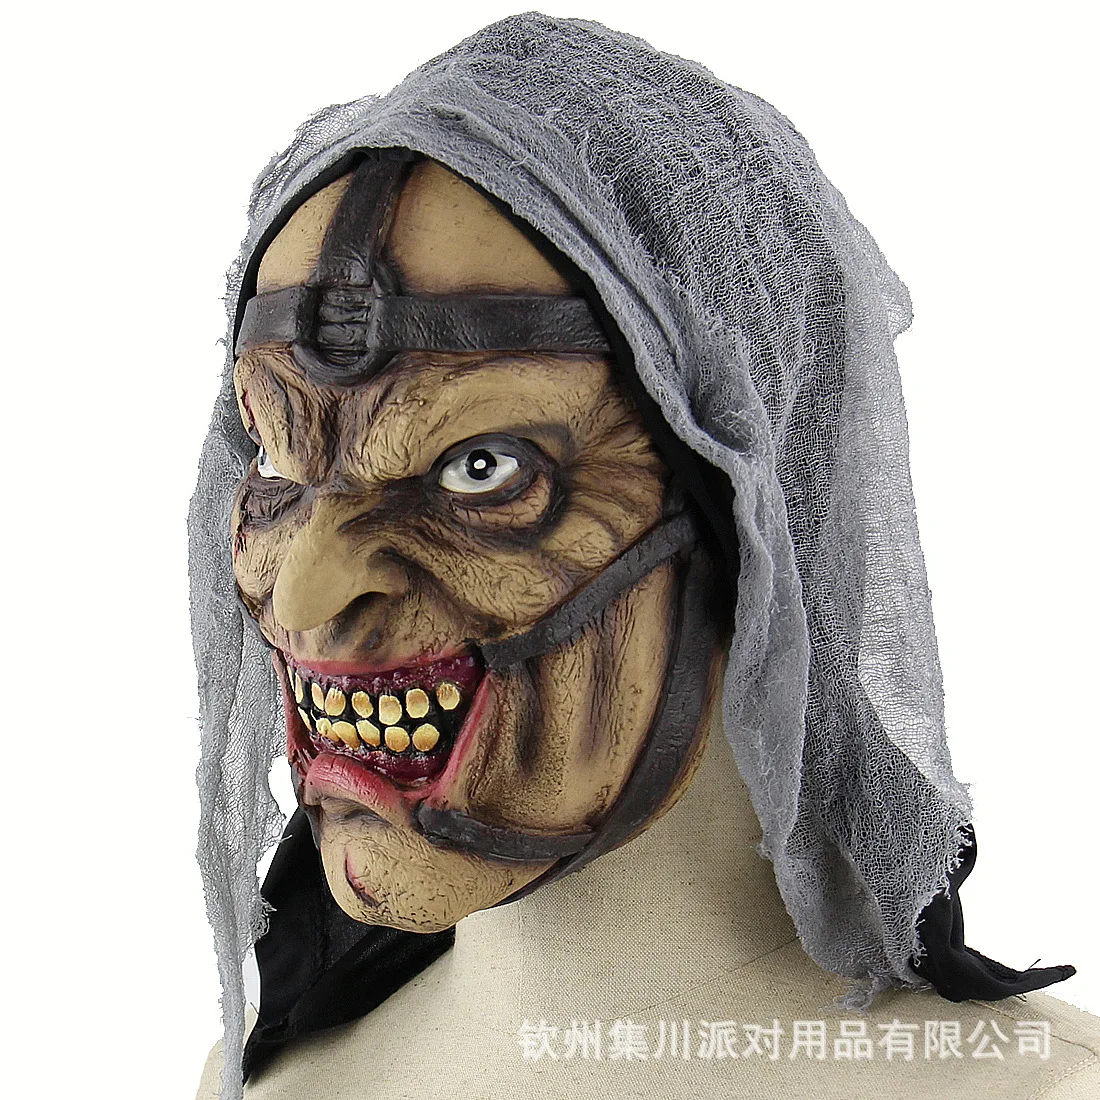 

Halloween Leather Strap Blame Men's Mask Horror Latex Ghost Mask Scream Zombie Death Mask Dressing up Party Props